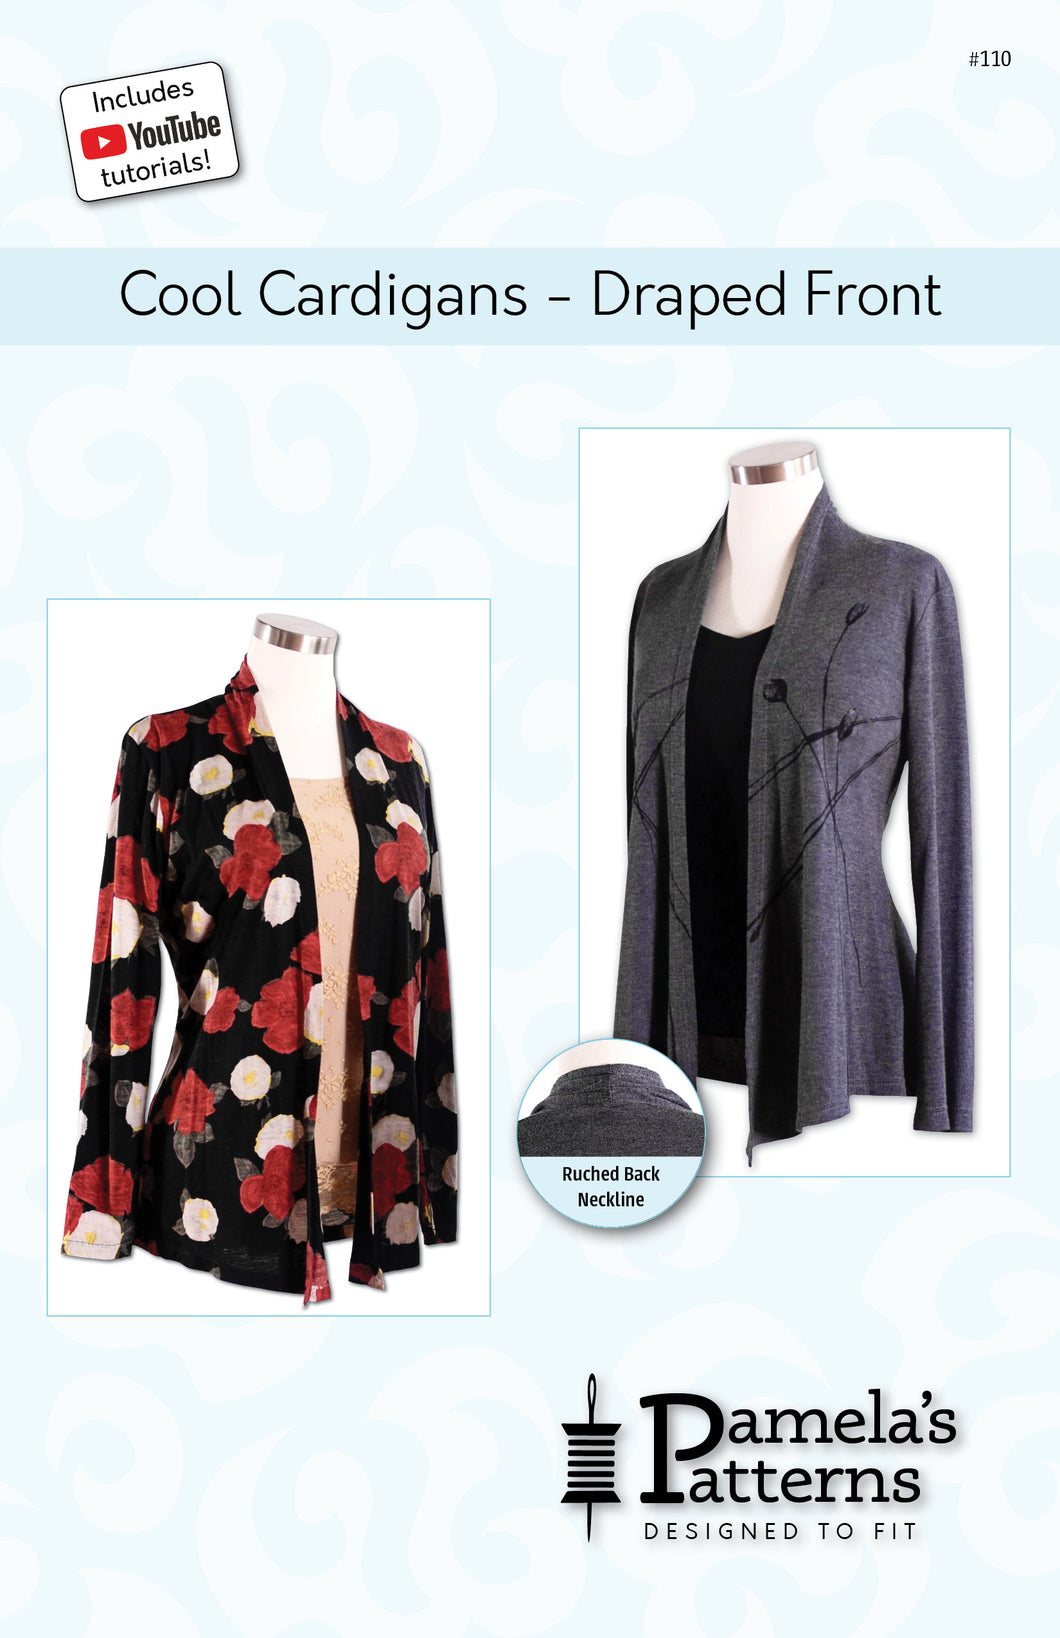 #110 Cool Cardigans - Draped Front